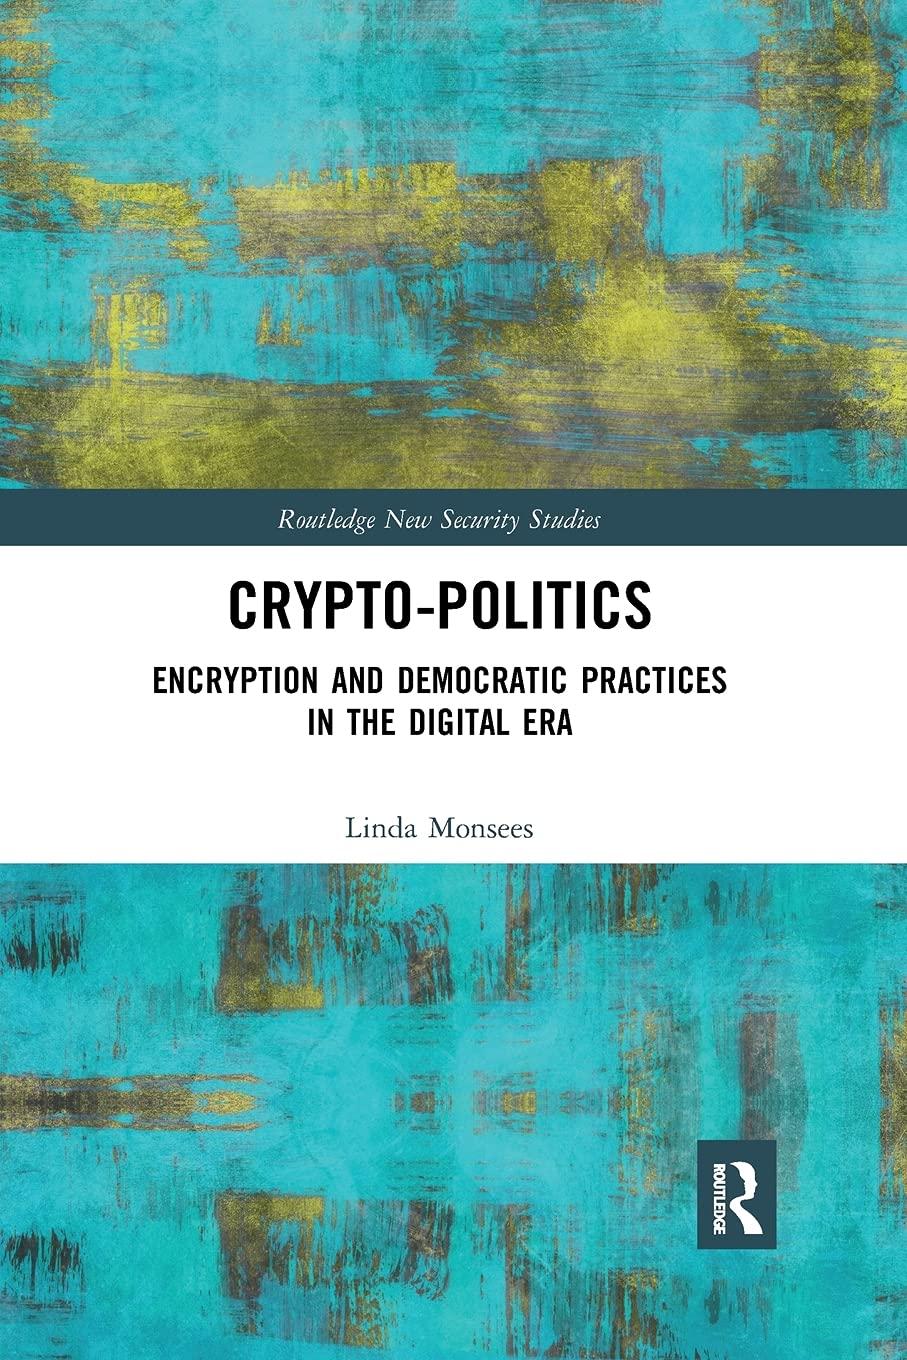 crypto politics routledge new security studies 1st edition linda monsees 0367785188, 978-0367785185